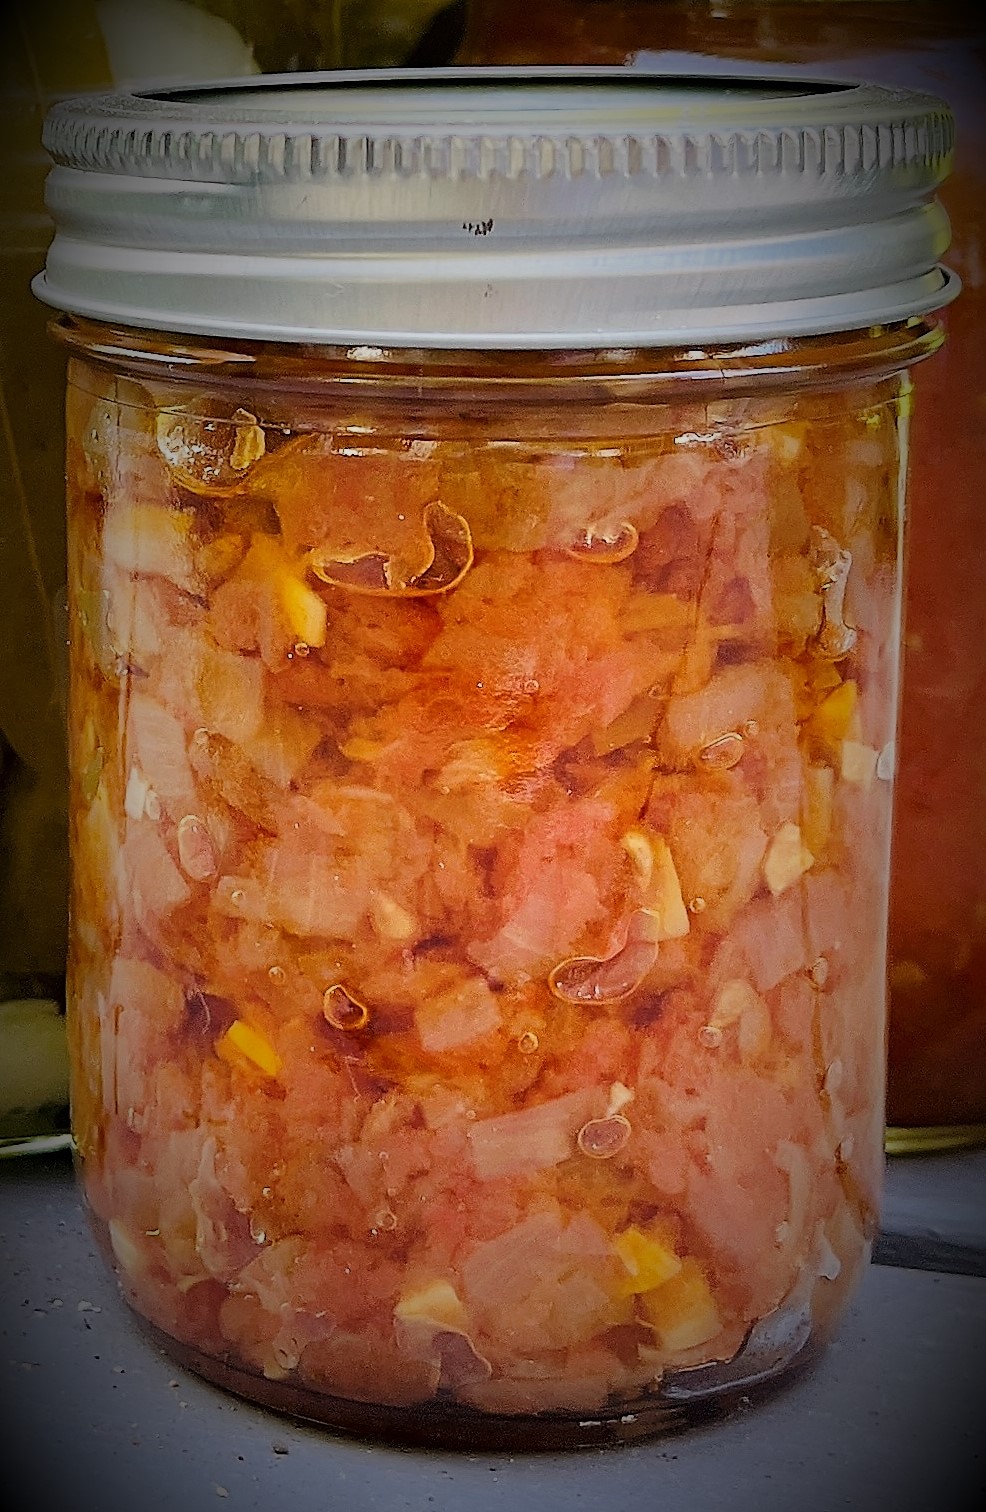 Thomas Keller Inspired Sofrito Recipe For Canning Or Eat Now